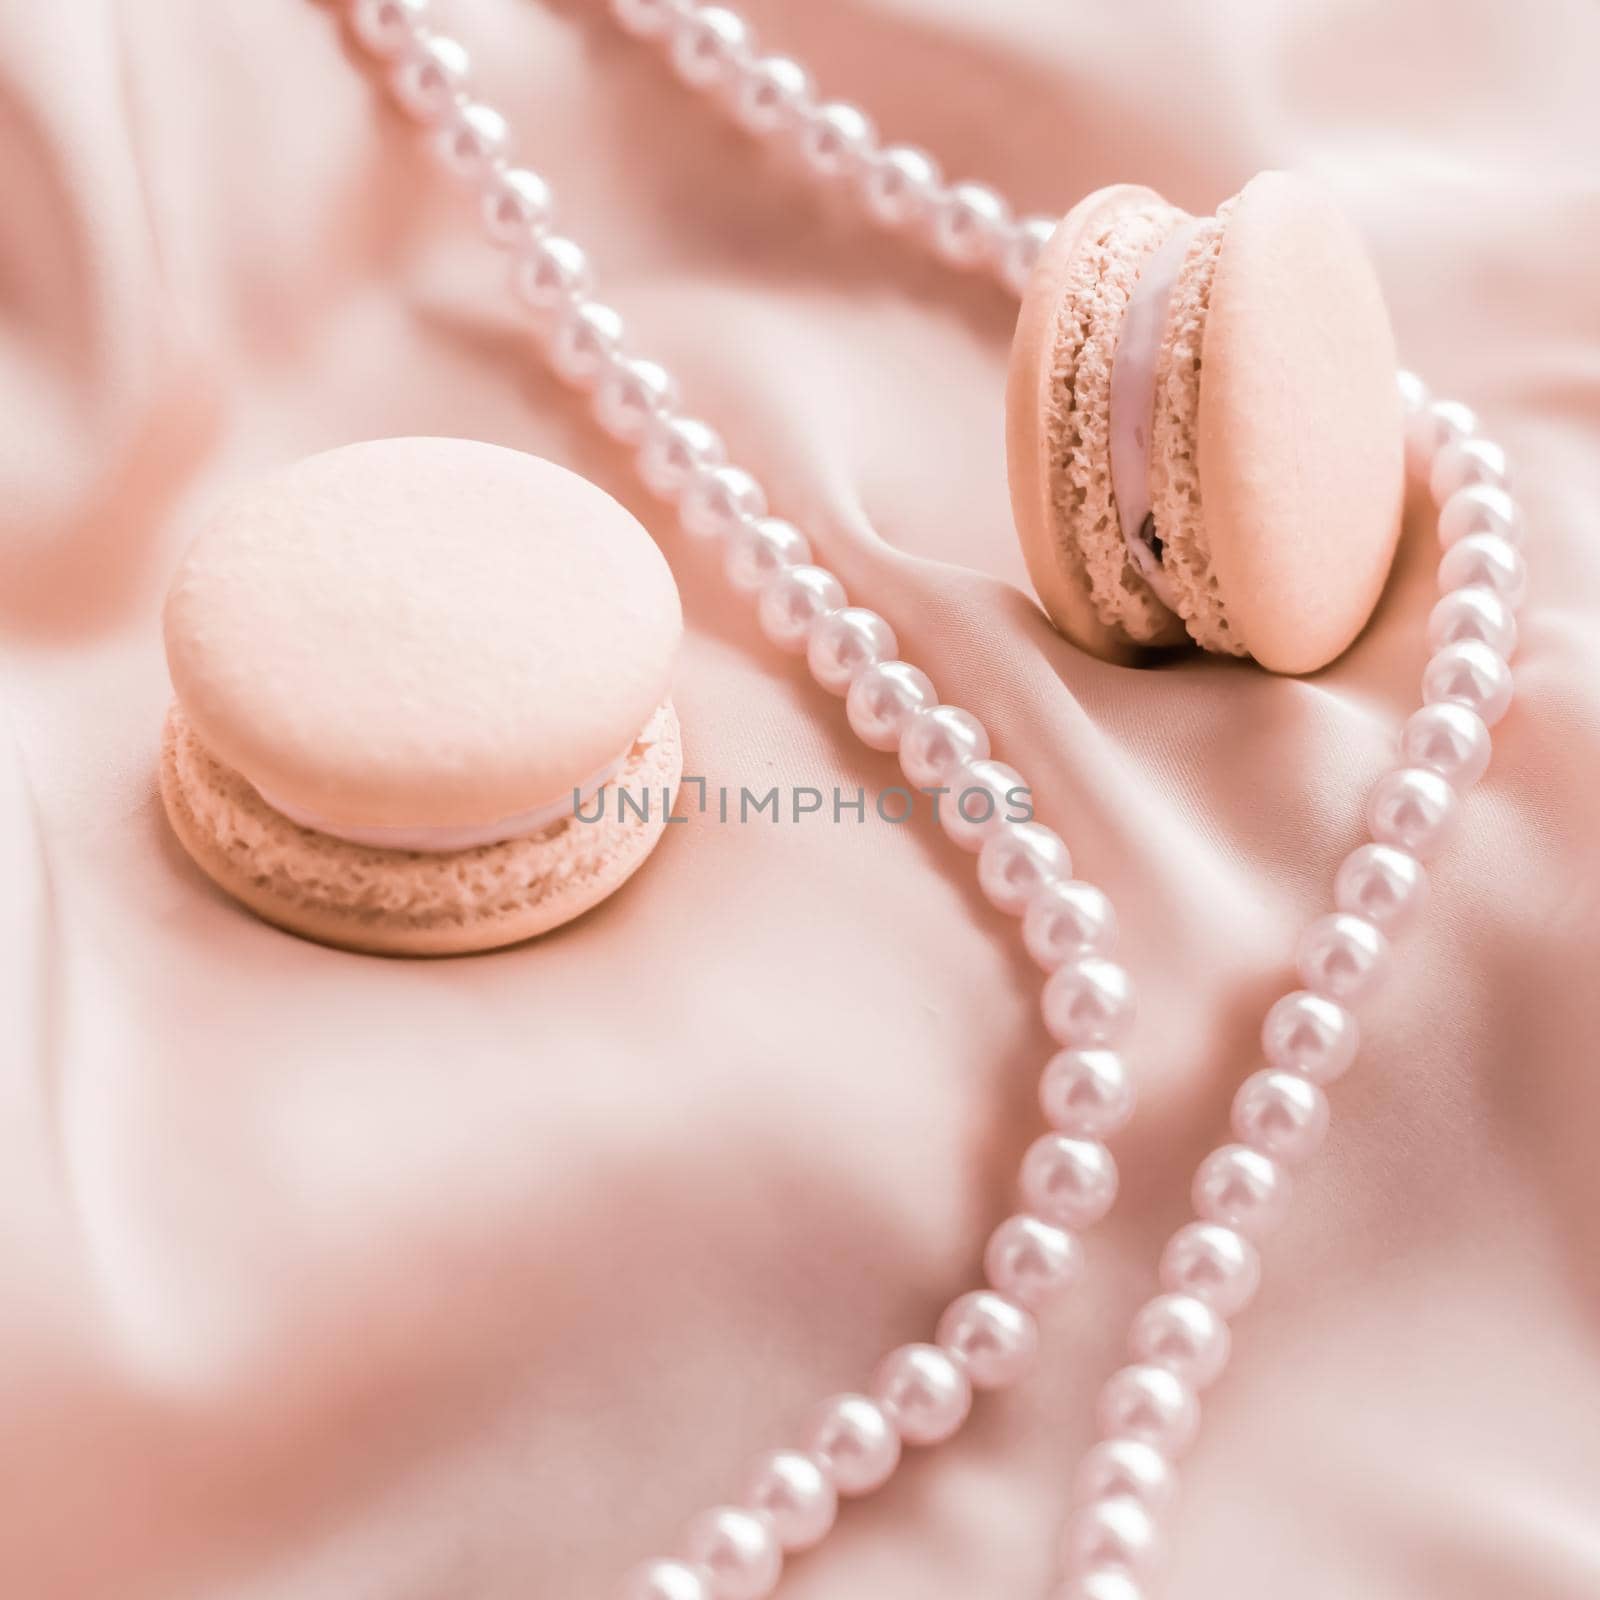 Sweet macaroons and pearls jewellery on silk background, parisian chic jewelry, French dessert food and cake macaron for luxury confectionery brand, holiday gift by Anneleven